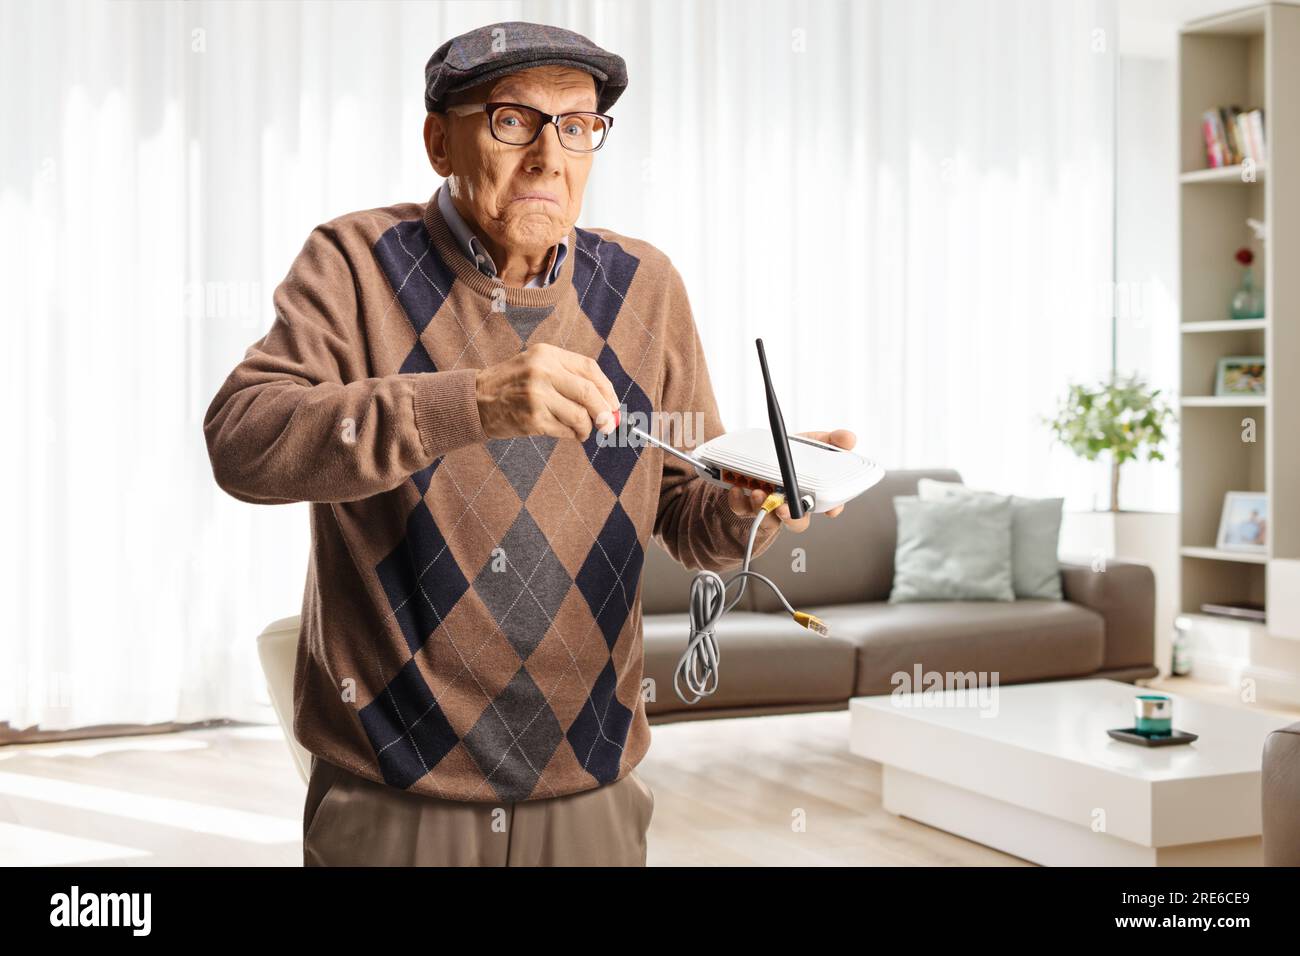 Funny old man fixing a router with a screwdriver at home in a living room Stock Photo